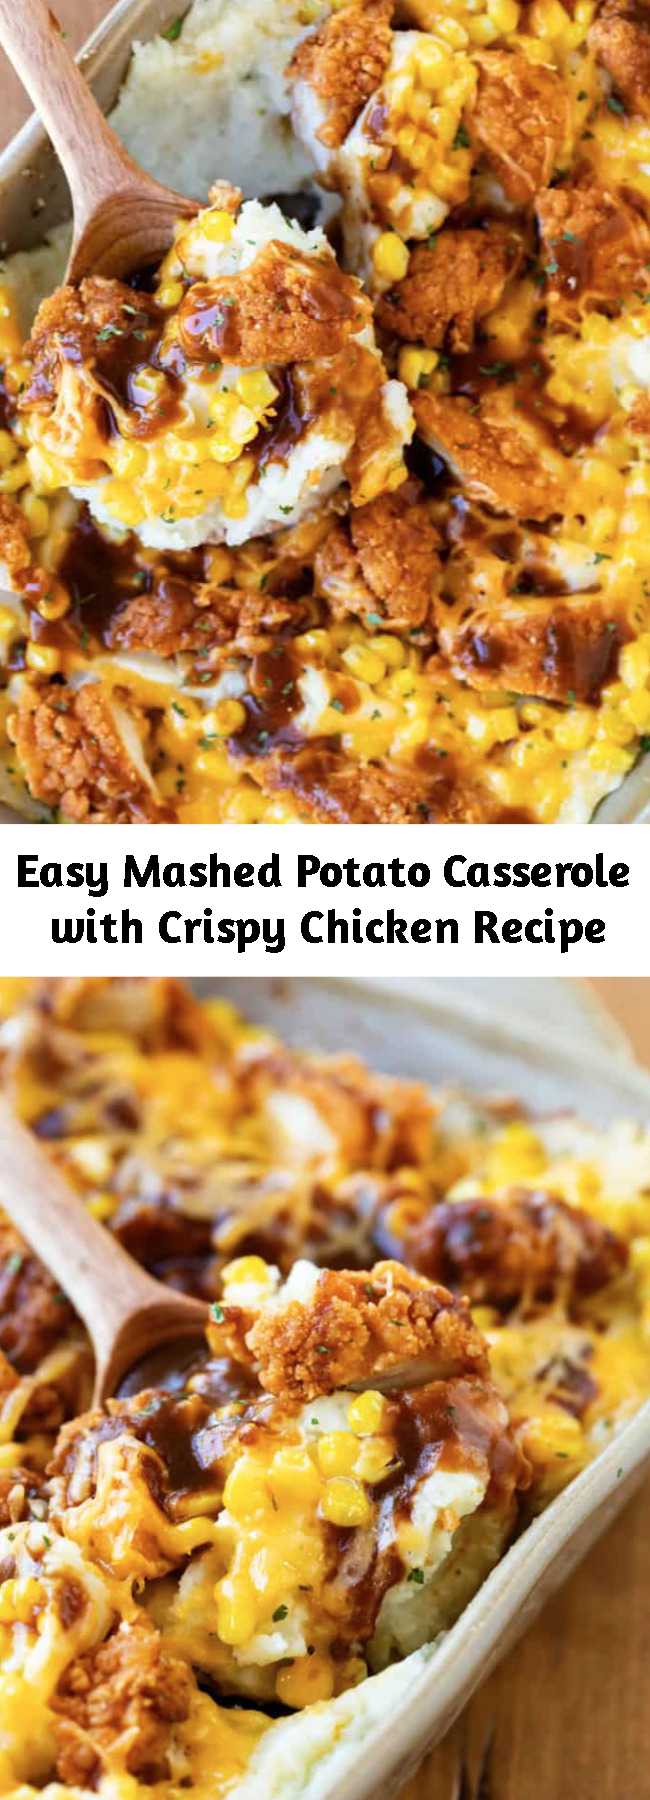 Easy Mashed Potato Casserole with Crispy Chicken Recipe - This mouth-watering mashed potato casserole is loaded with creamy mashed potatoes and topped with  Crispy Chicken Tenders, corn, cheddar cheese, and a drizzle of brown gravy! It’s easy to make ahead of time and bake later for a quick family dinner! #comfortfood #familydinnerideas #dinnerideas #chickendinnerideas #thanksgivingleftovers